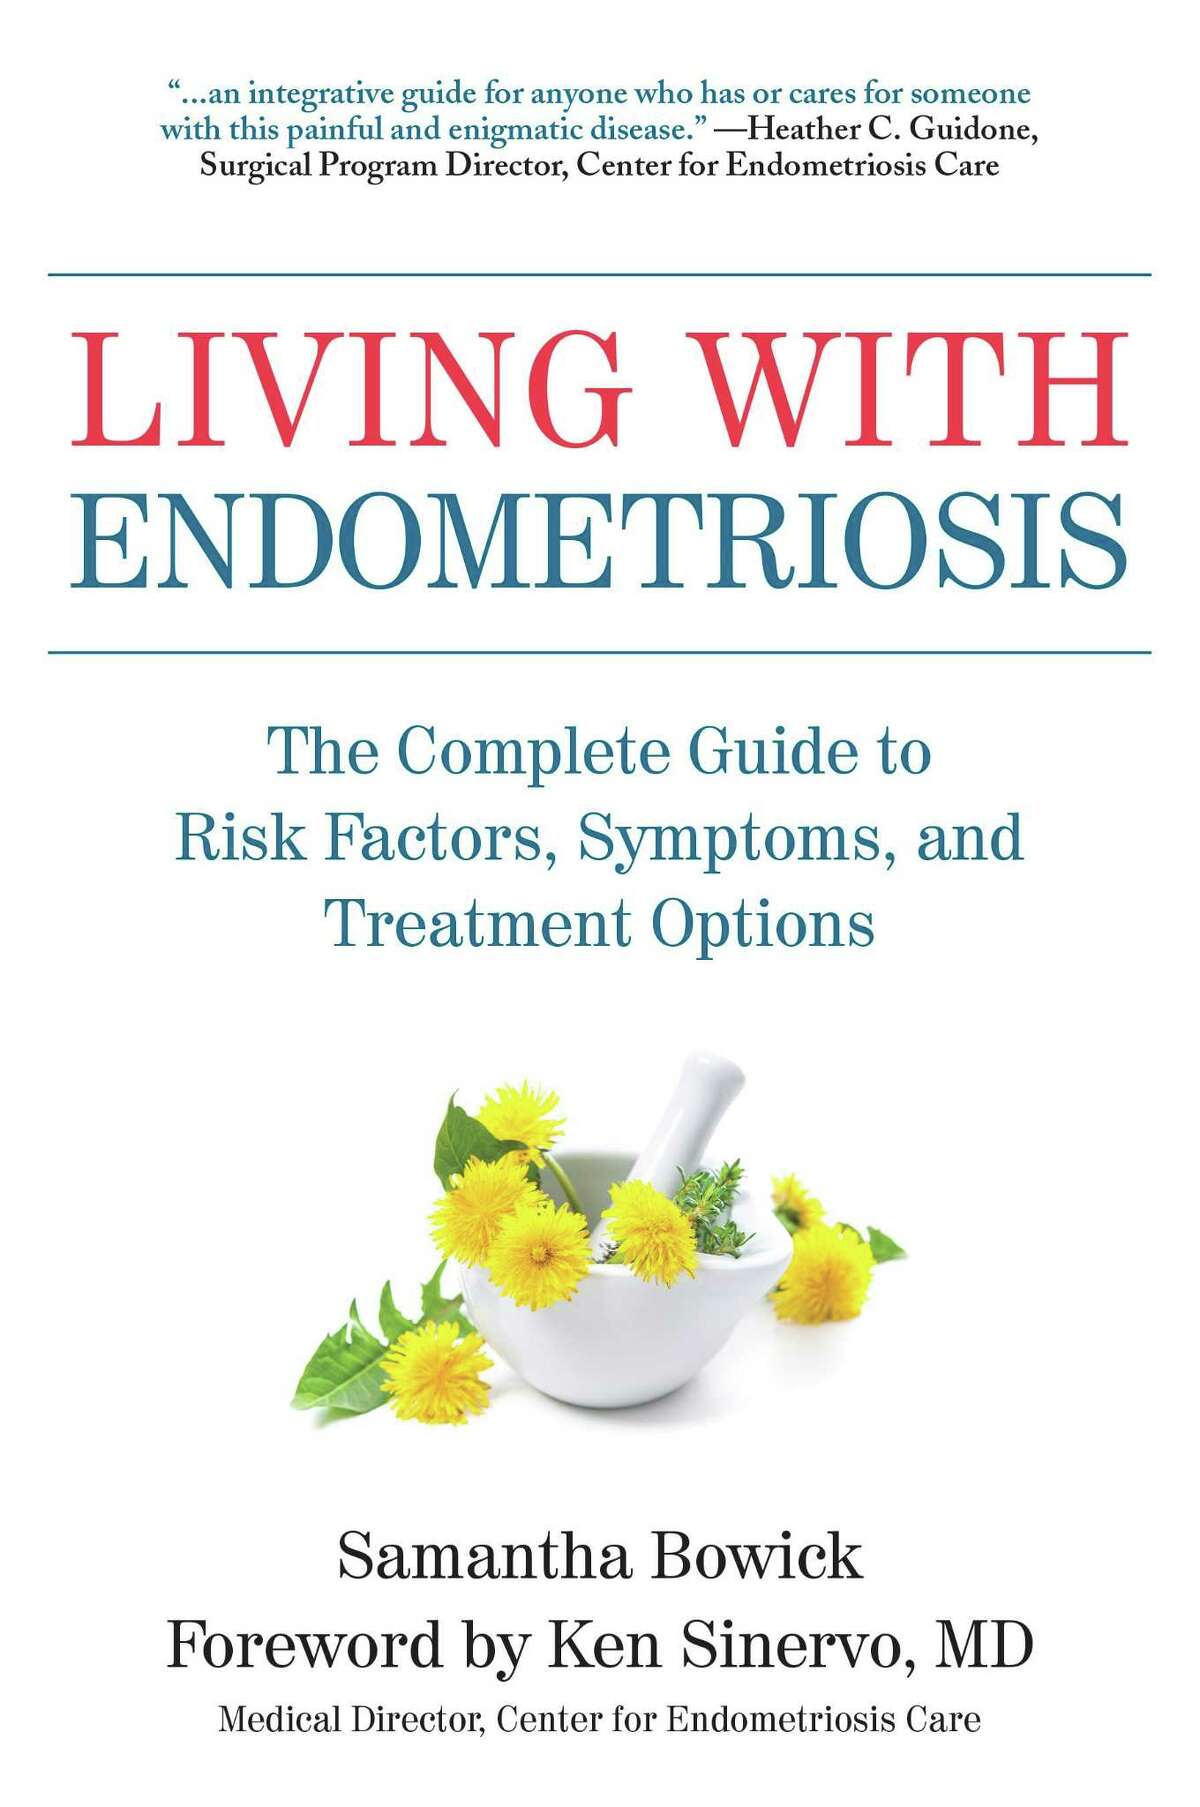 Samantha Bowick is the author of "Living with Endometriosis," a book of resources and personal stories on the debilitating disease.